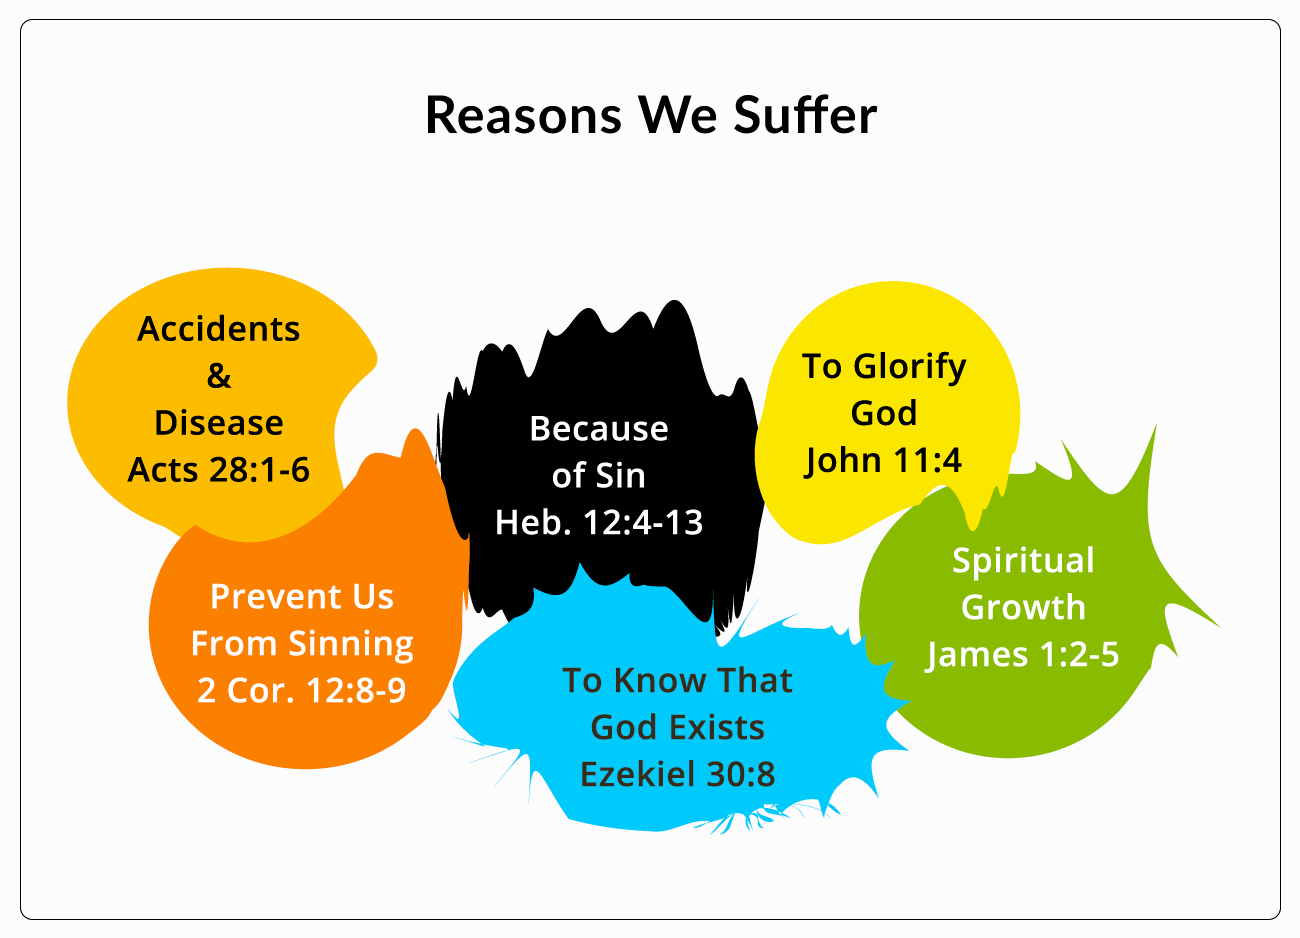 Some Reasons We Suffer